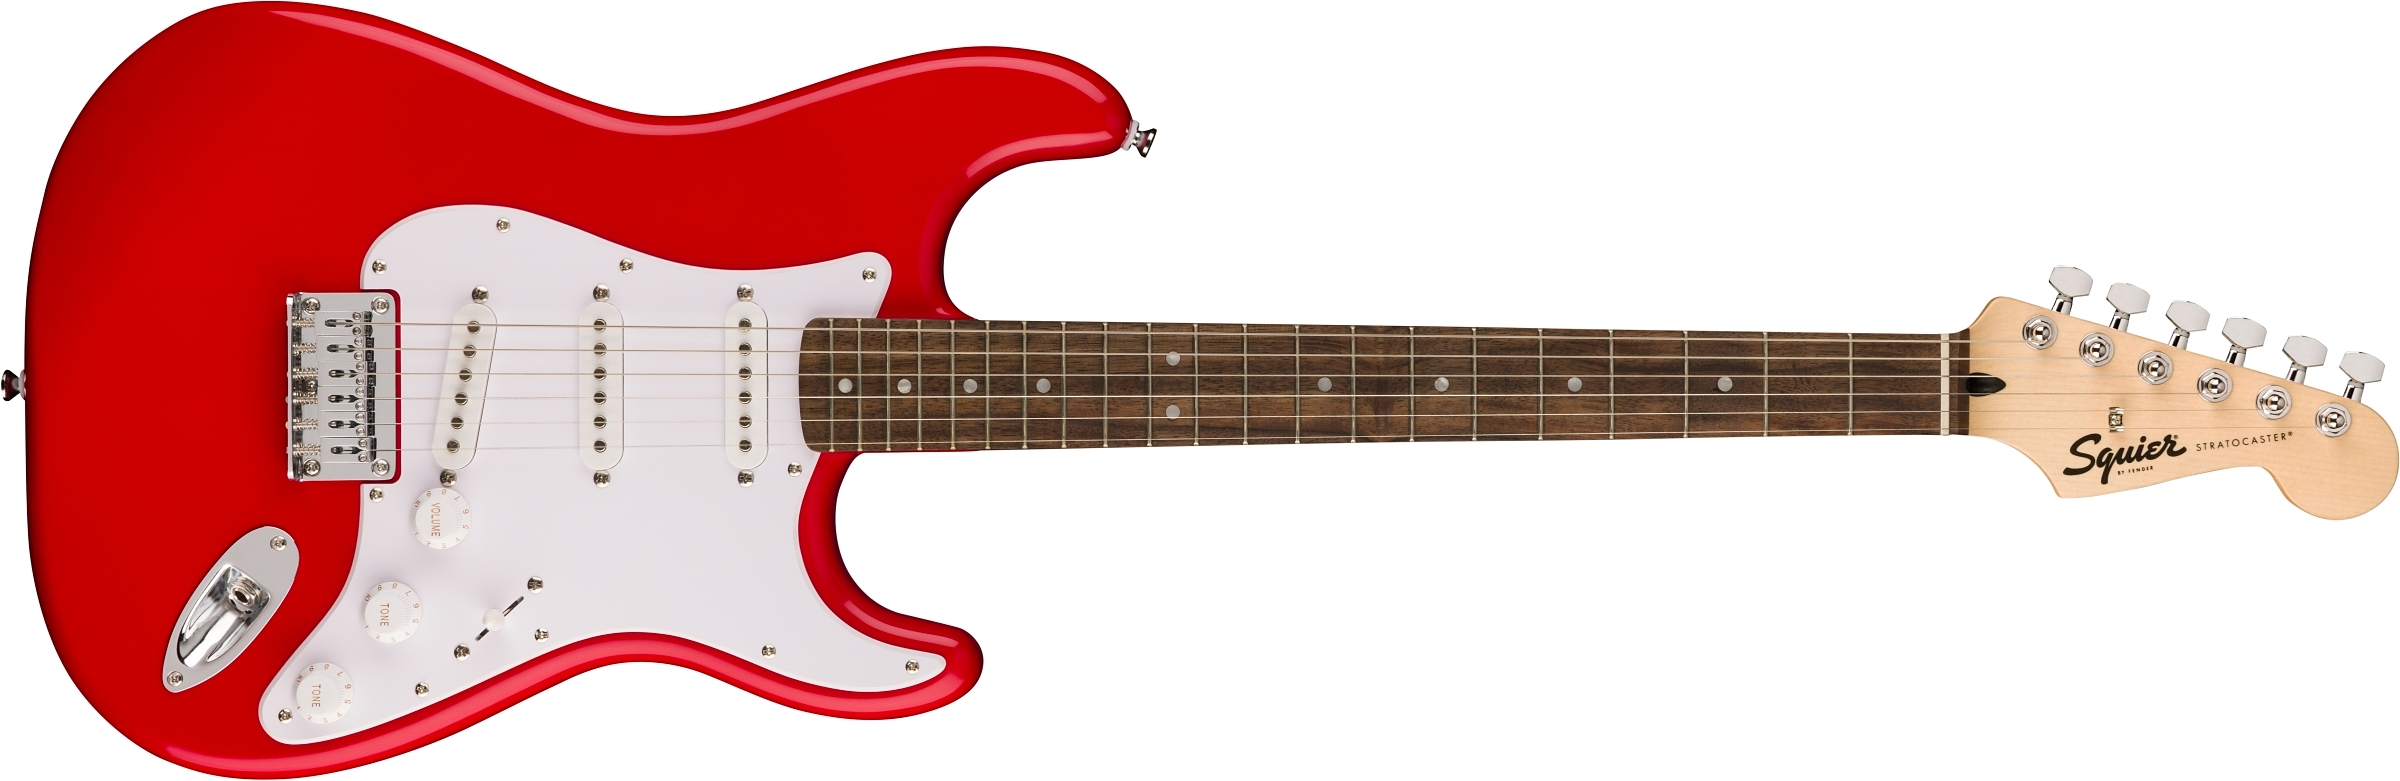 Squier Sonic Stratocaster HT Electric Guitar Red